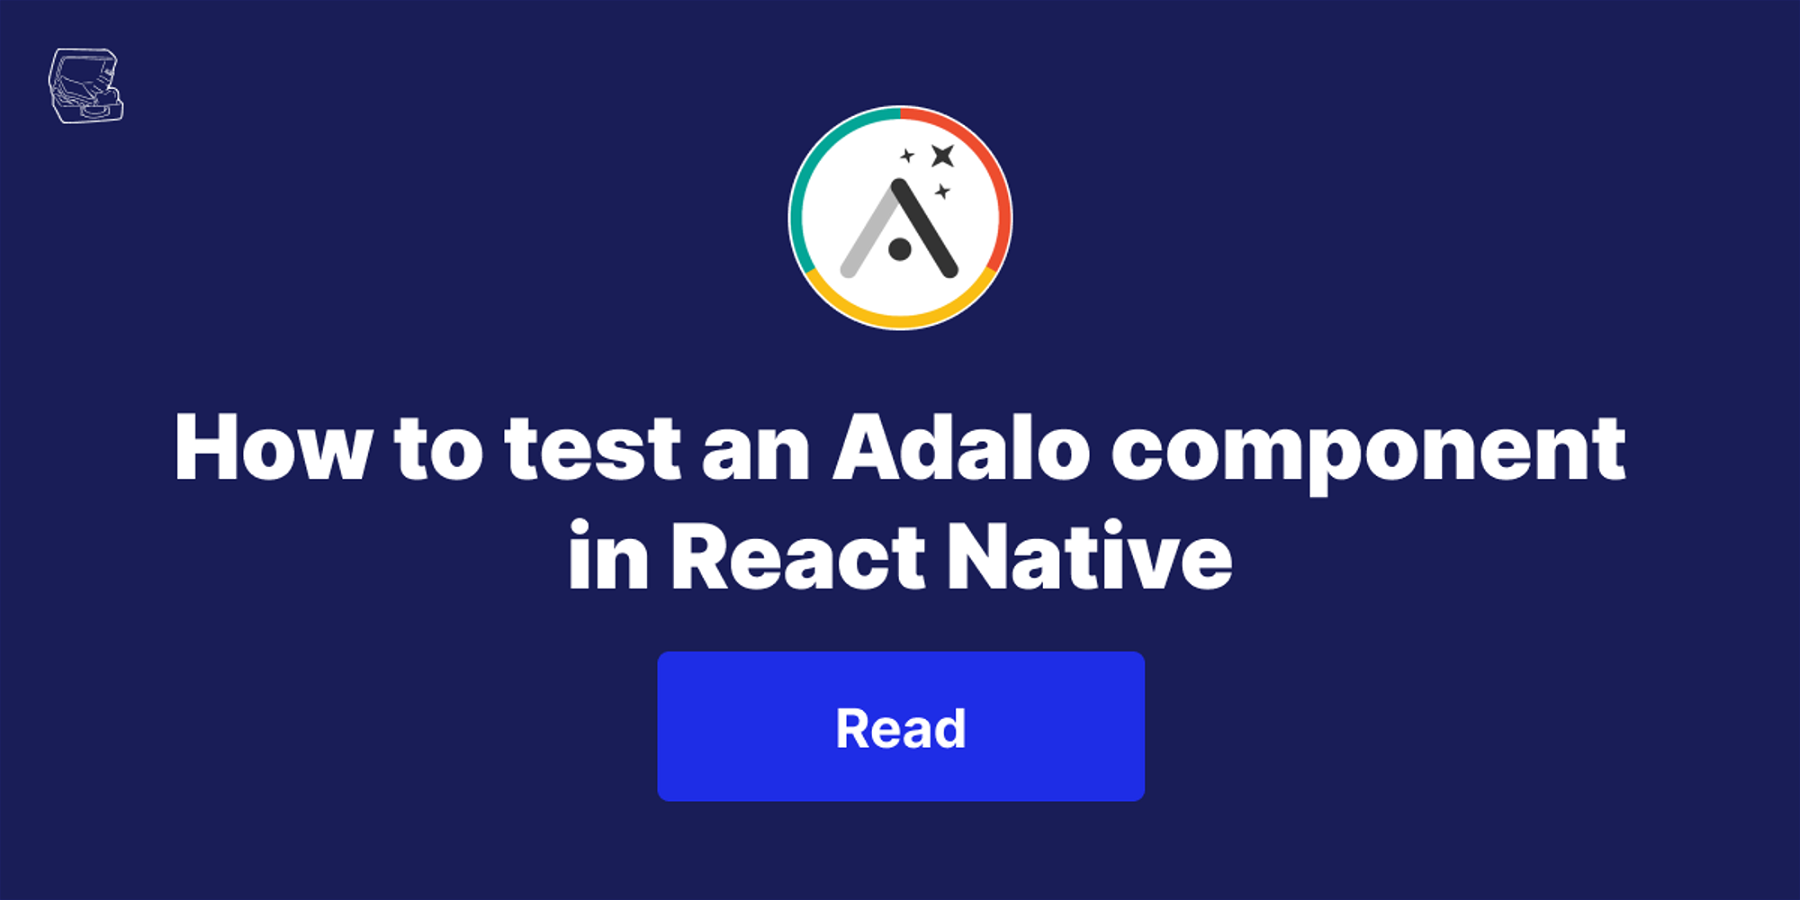 How to test an Adalo component in a React Native environment